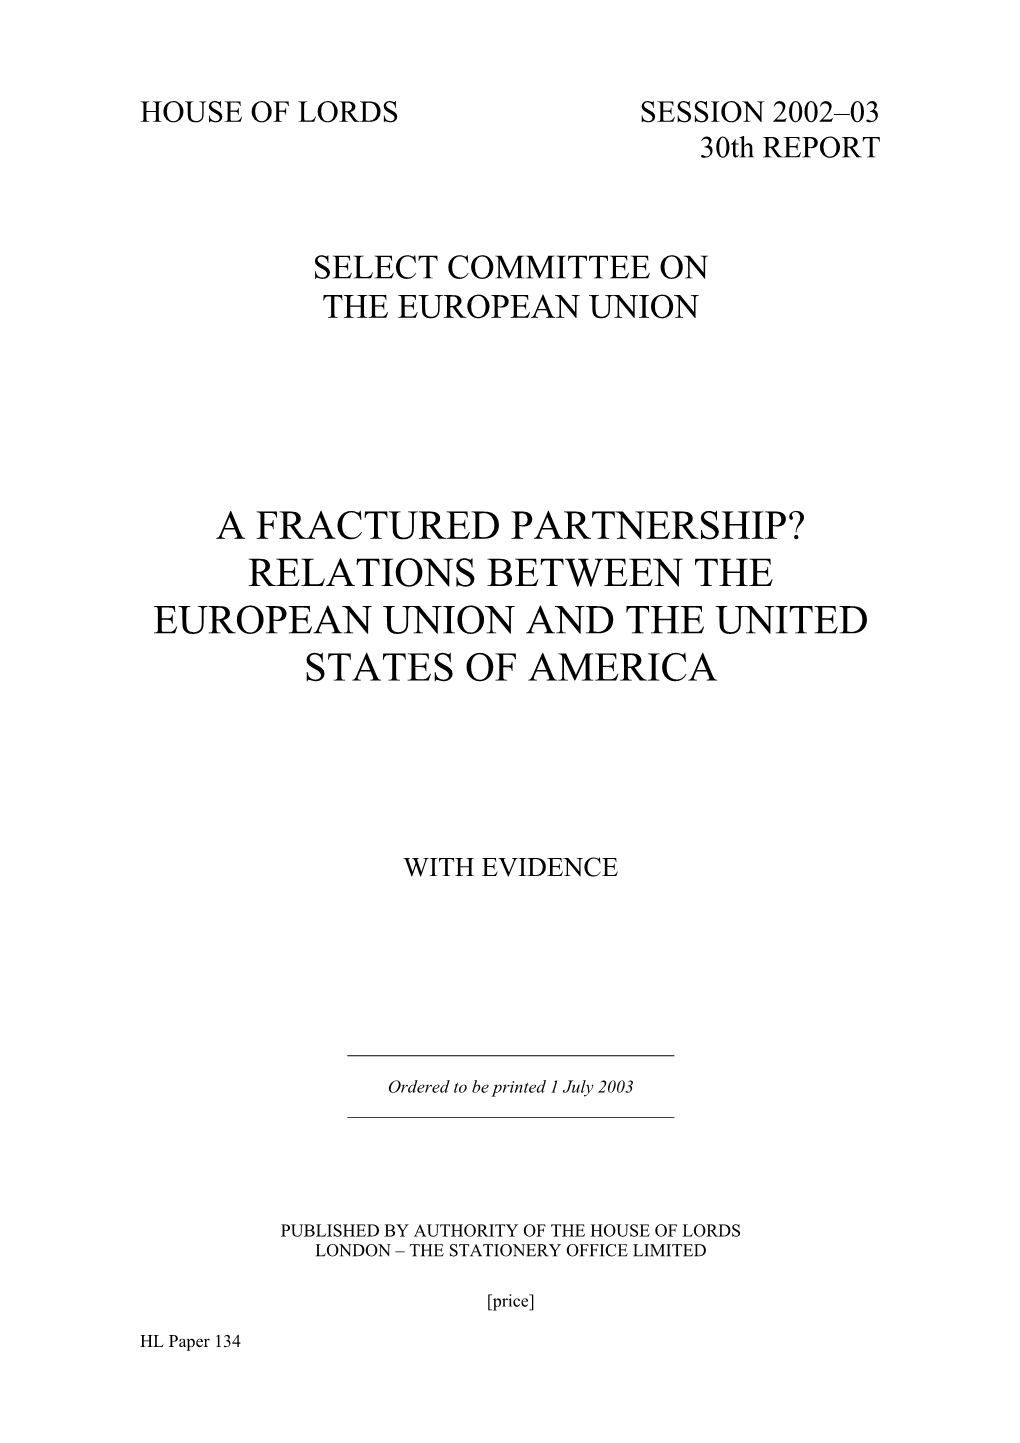 A Fractured Partnership? Relations Between the European Union and the United States of America